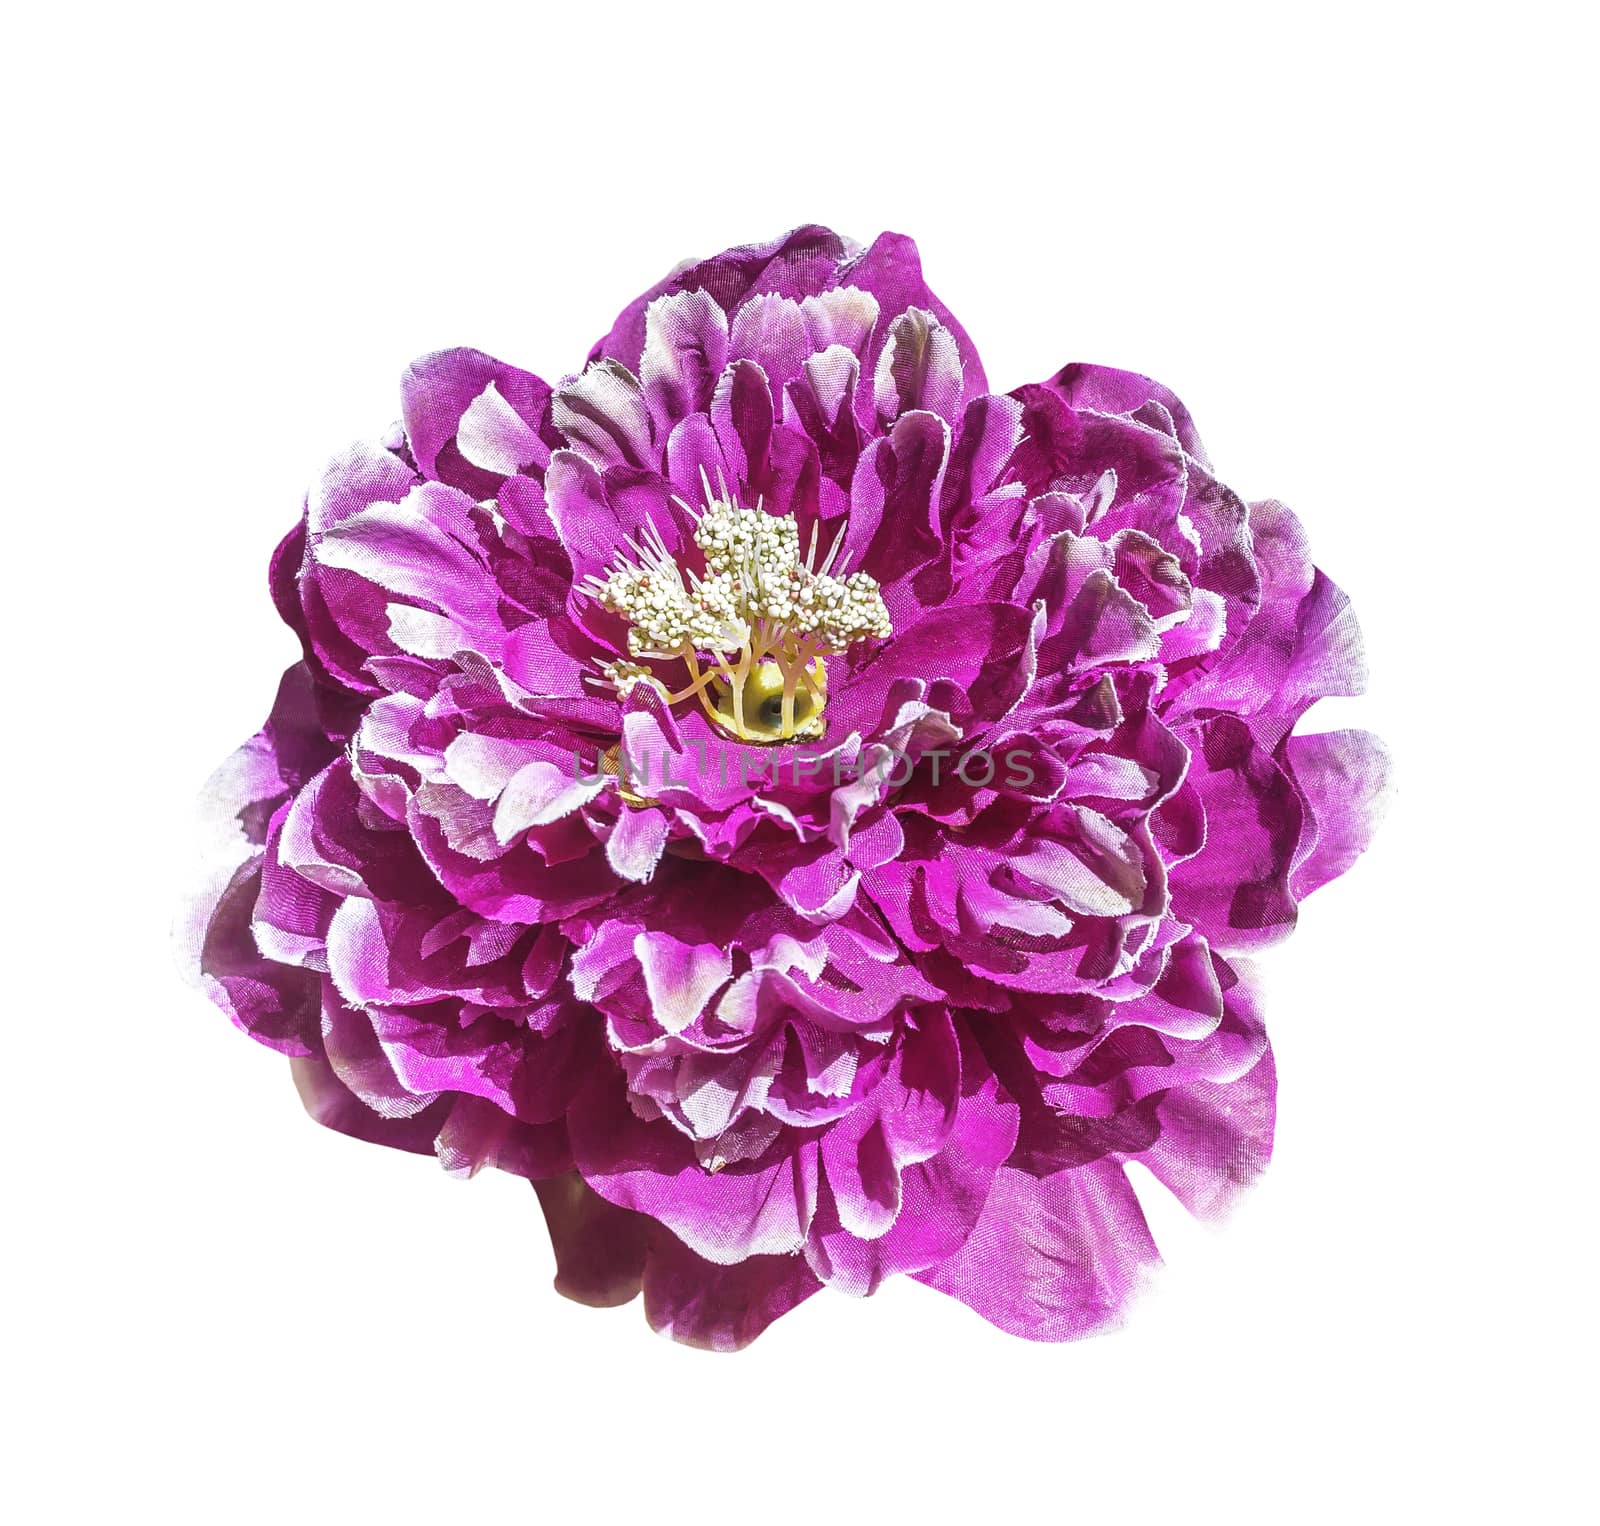 Magenta artificial flower isolated on white with clipping path